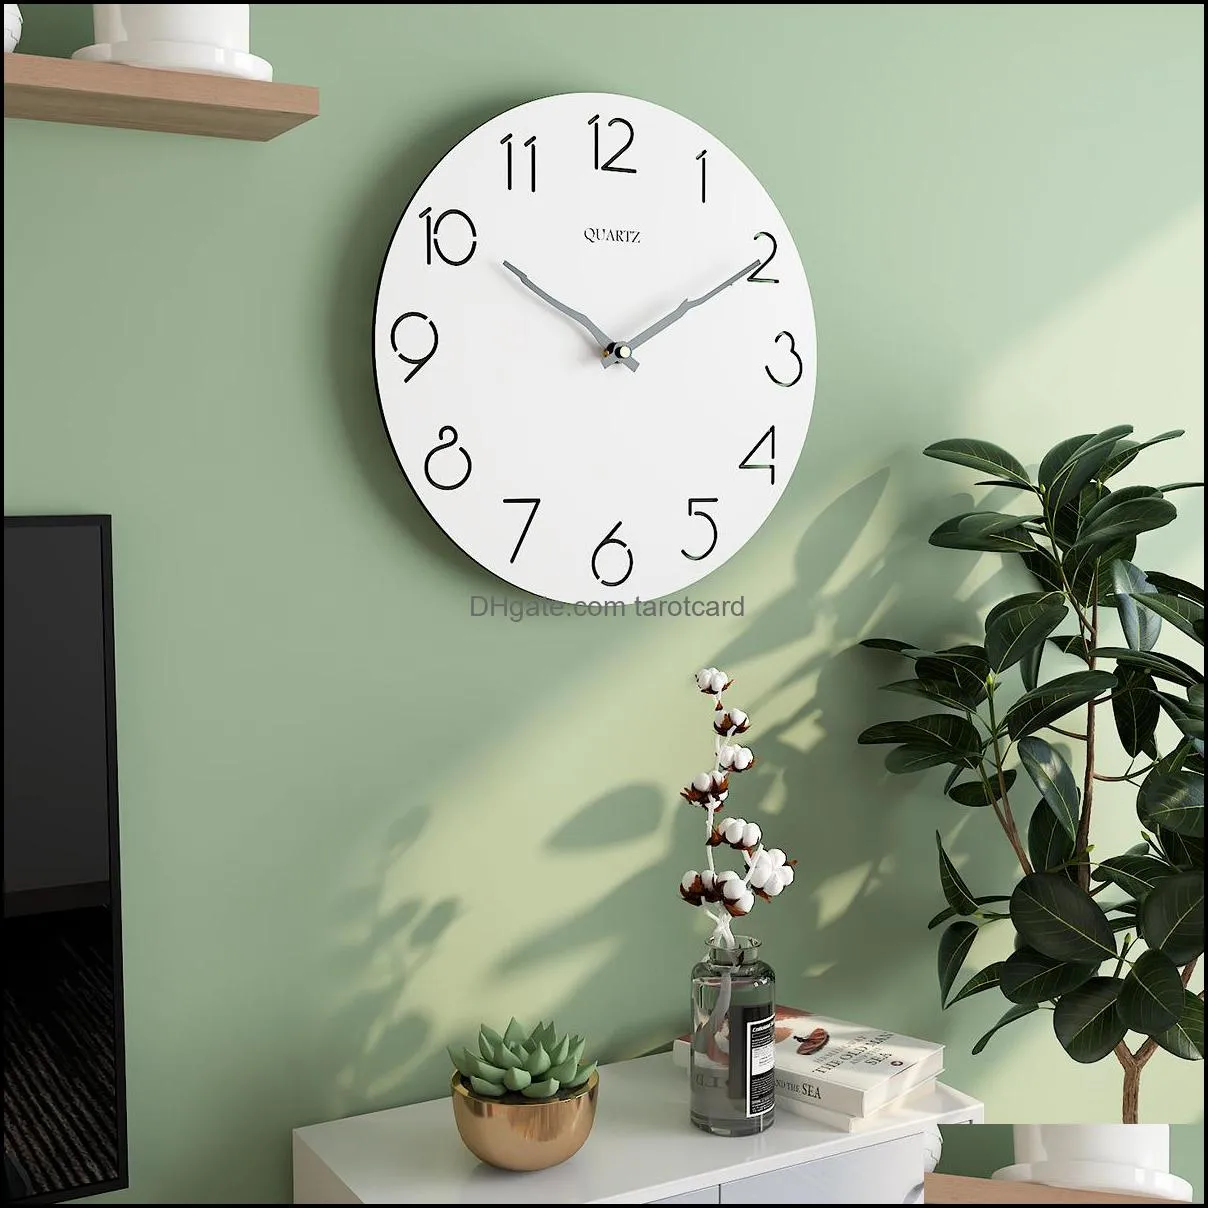 Nordic Simple Wooden 3D Wall Clock 12 inch Modern Design for Living Room Art Decor Kitchen Wood Hanging Watch Home Circular